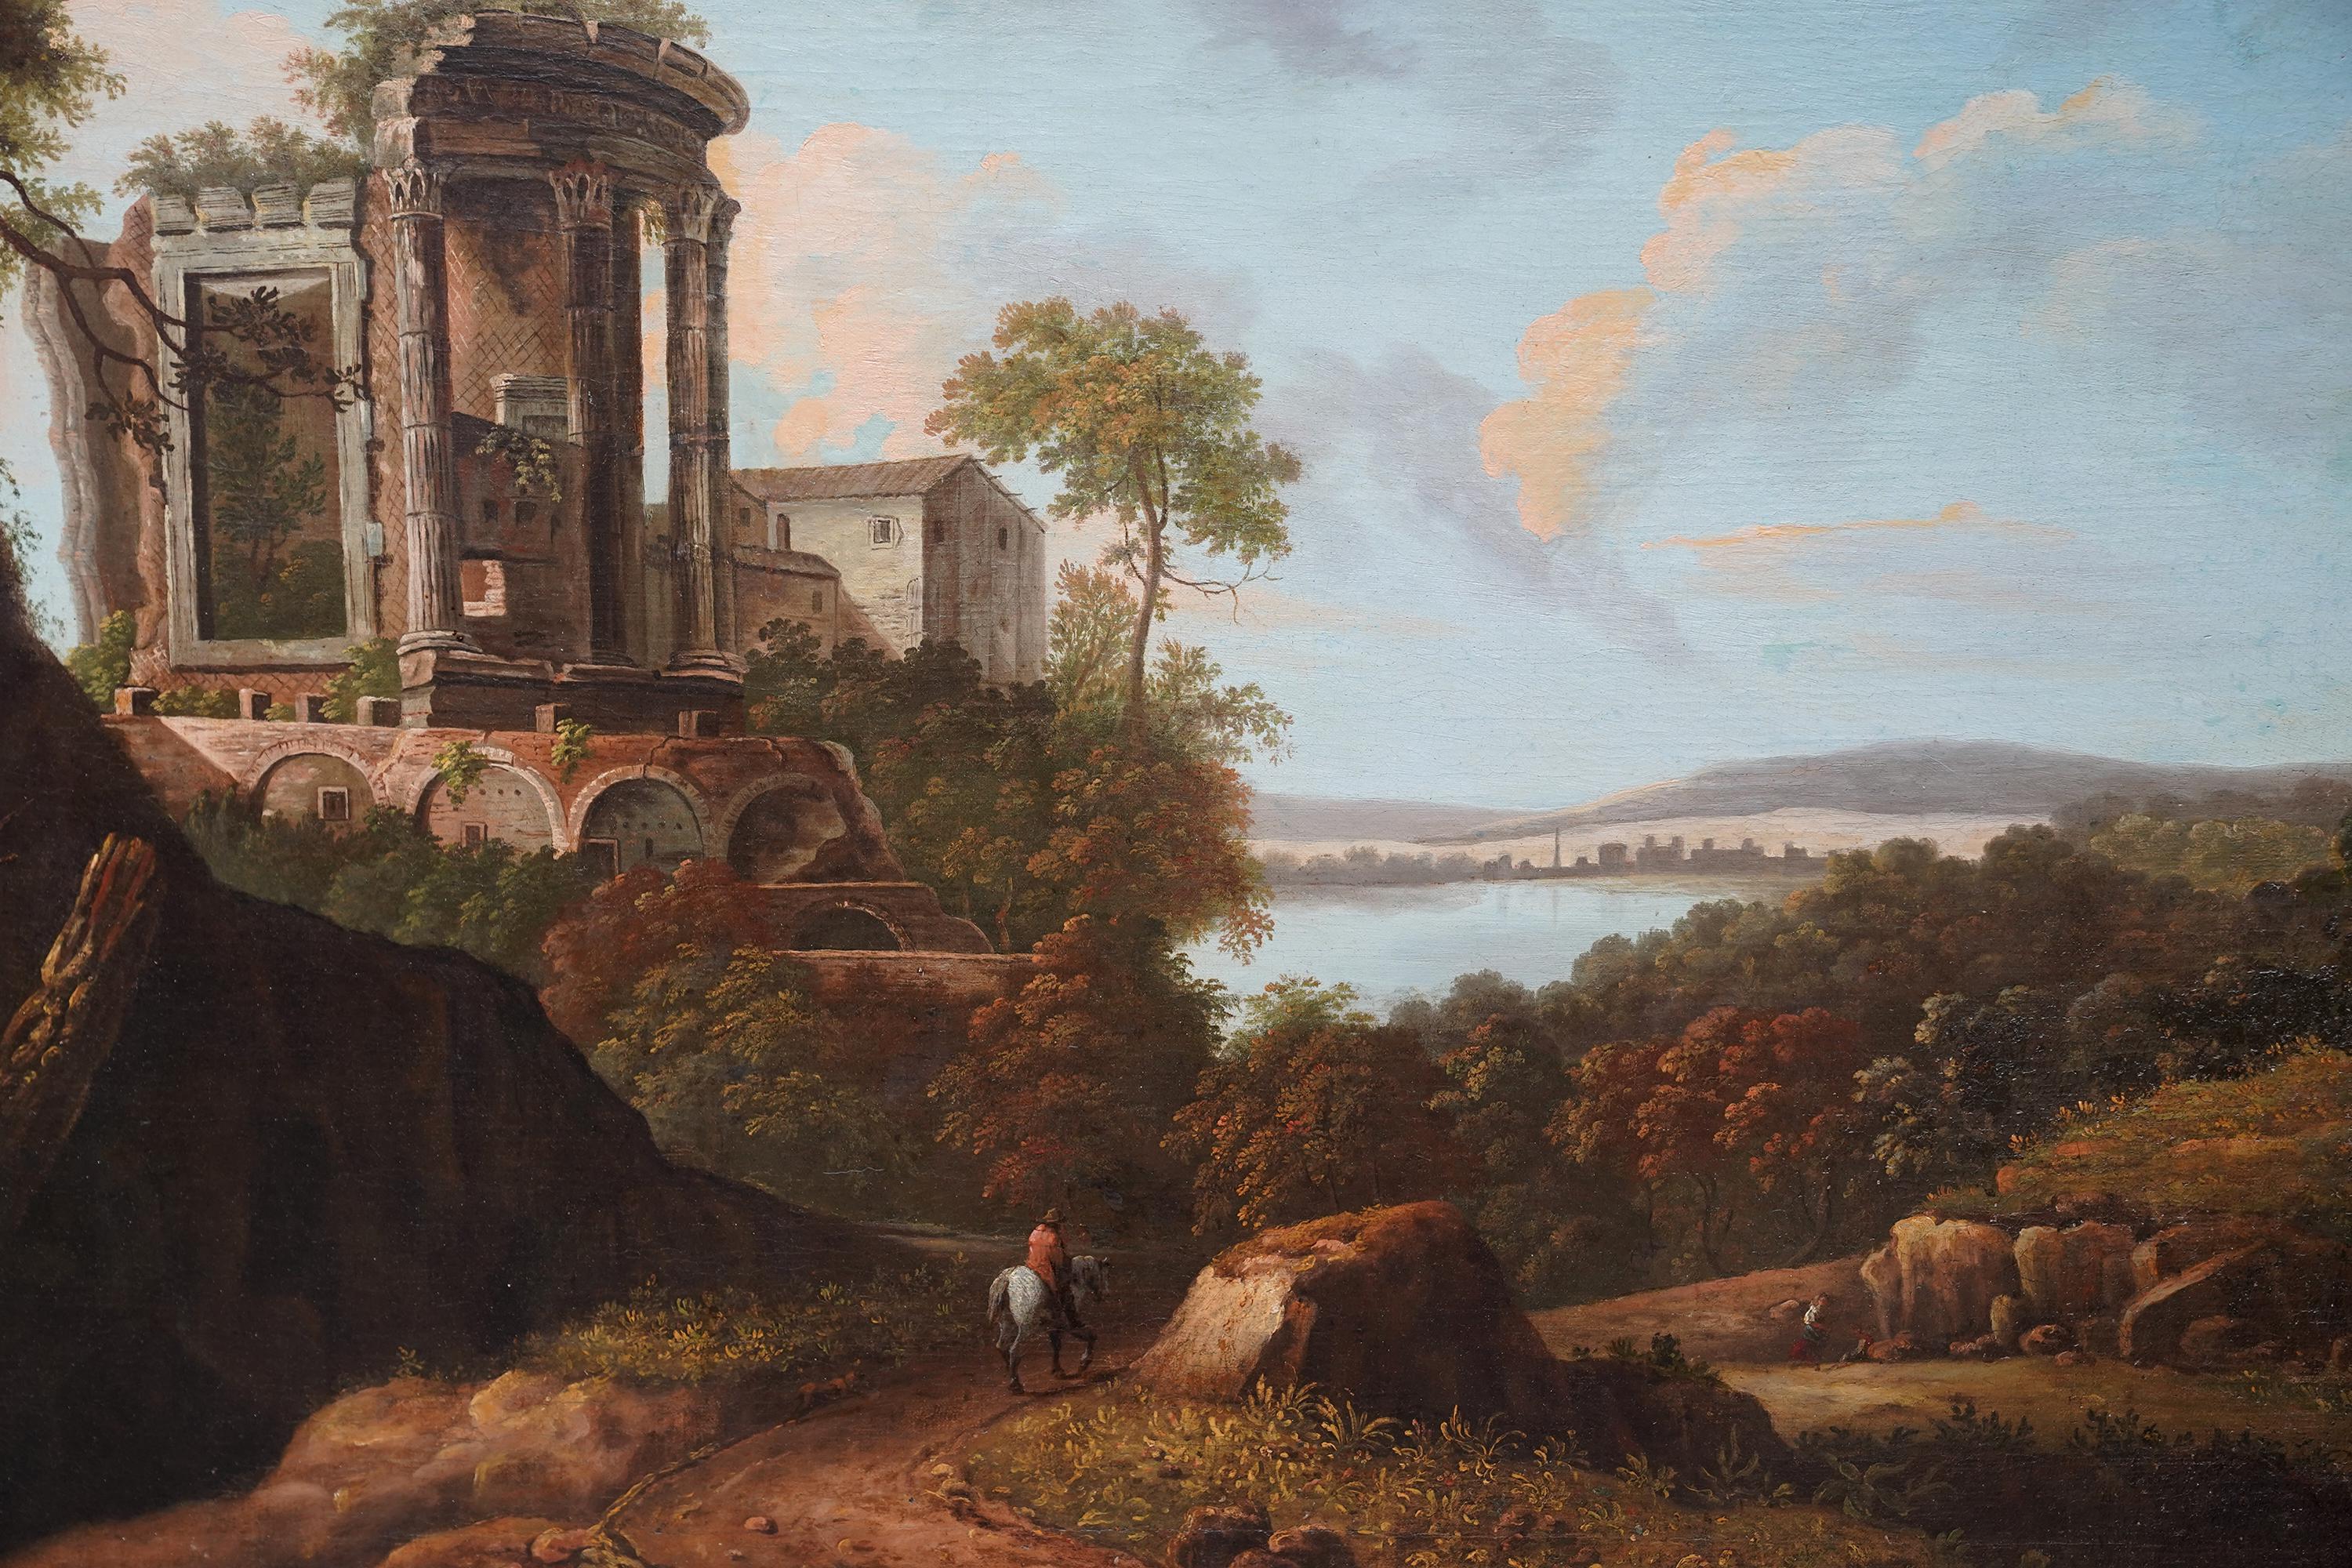 This stunning Italian Capriccio Old Master landscape oil painting is attributed to circle of Giovanni Paolo Panini. Painted circa 1740 it is a fantastic view of the Temple of Sibyl, an ancient Roman structure on the highest point of the acropolis of